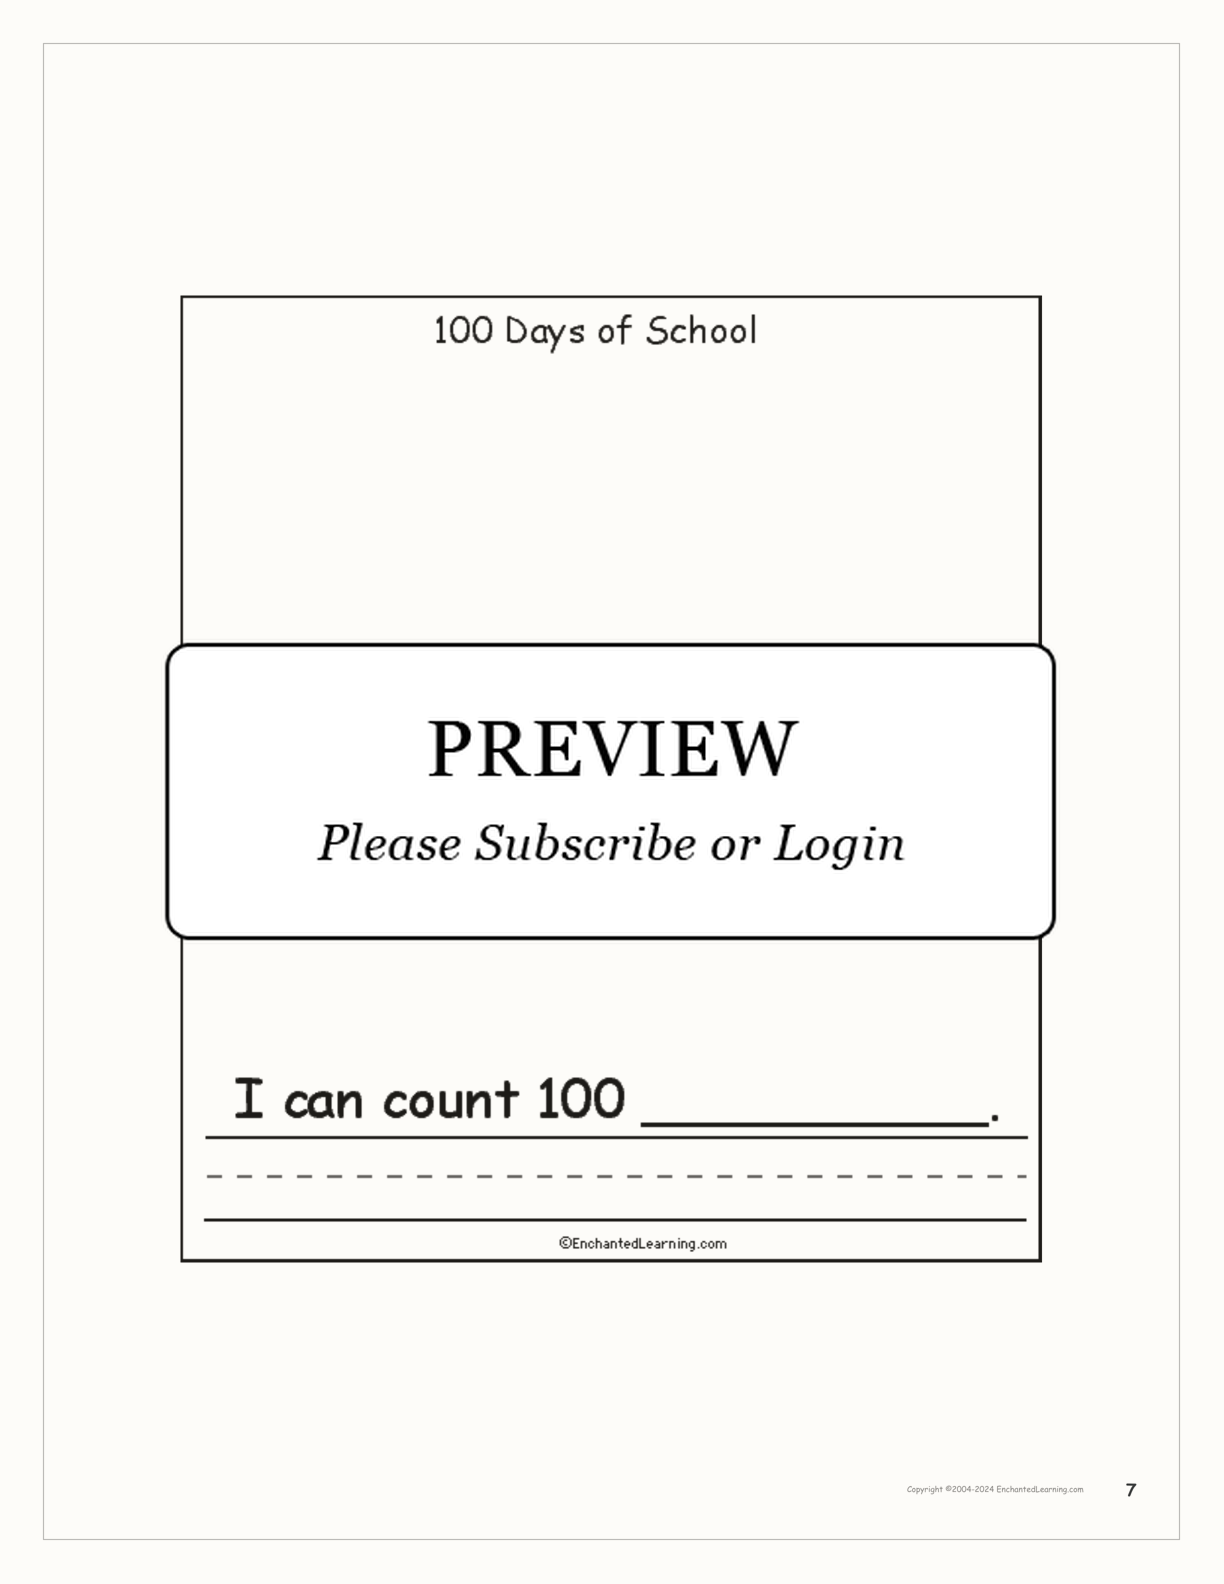 100 Days of School interactive worksheet page 7